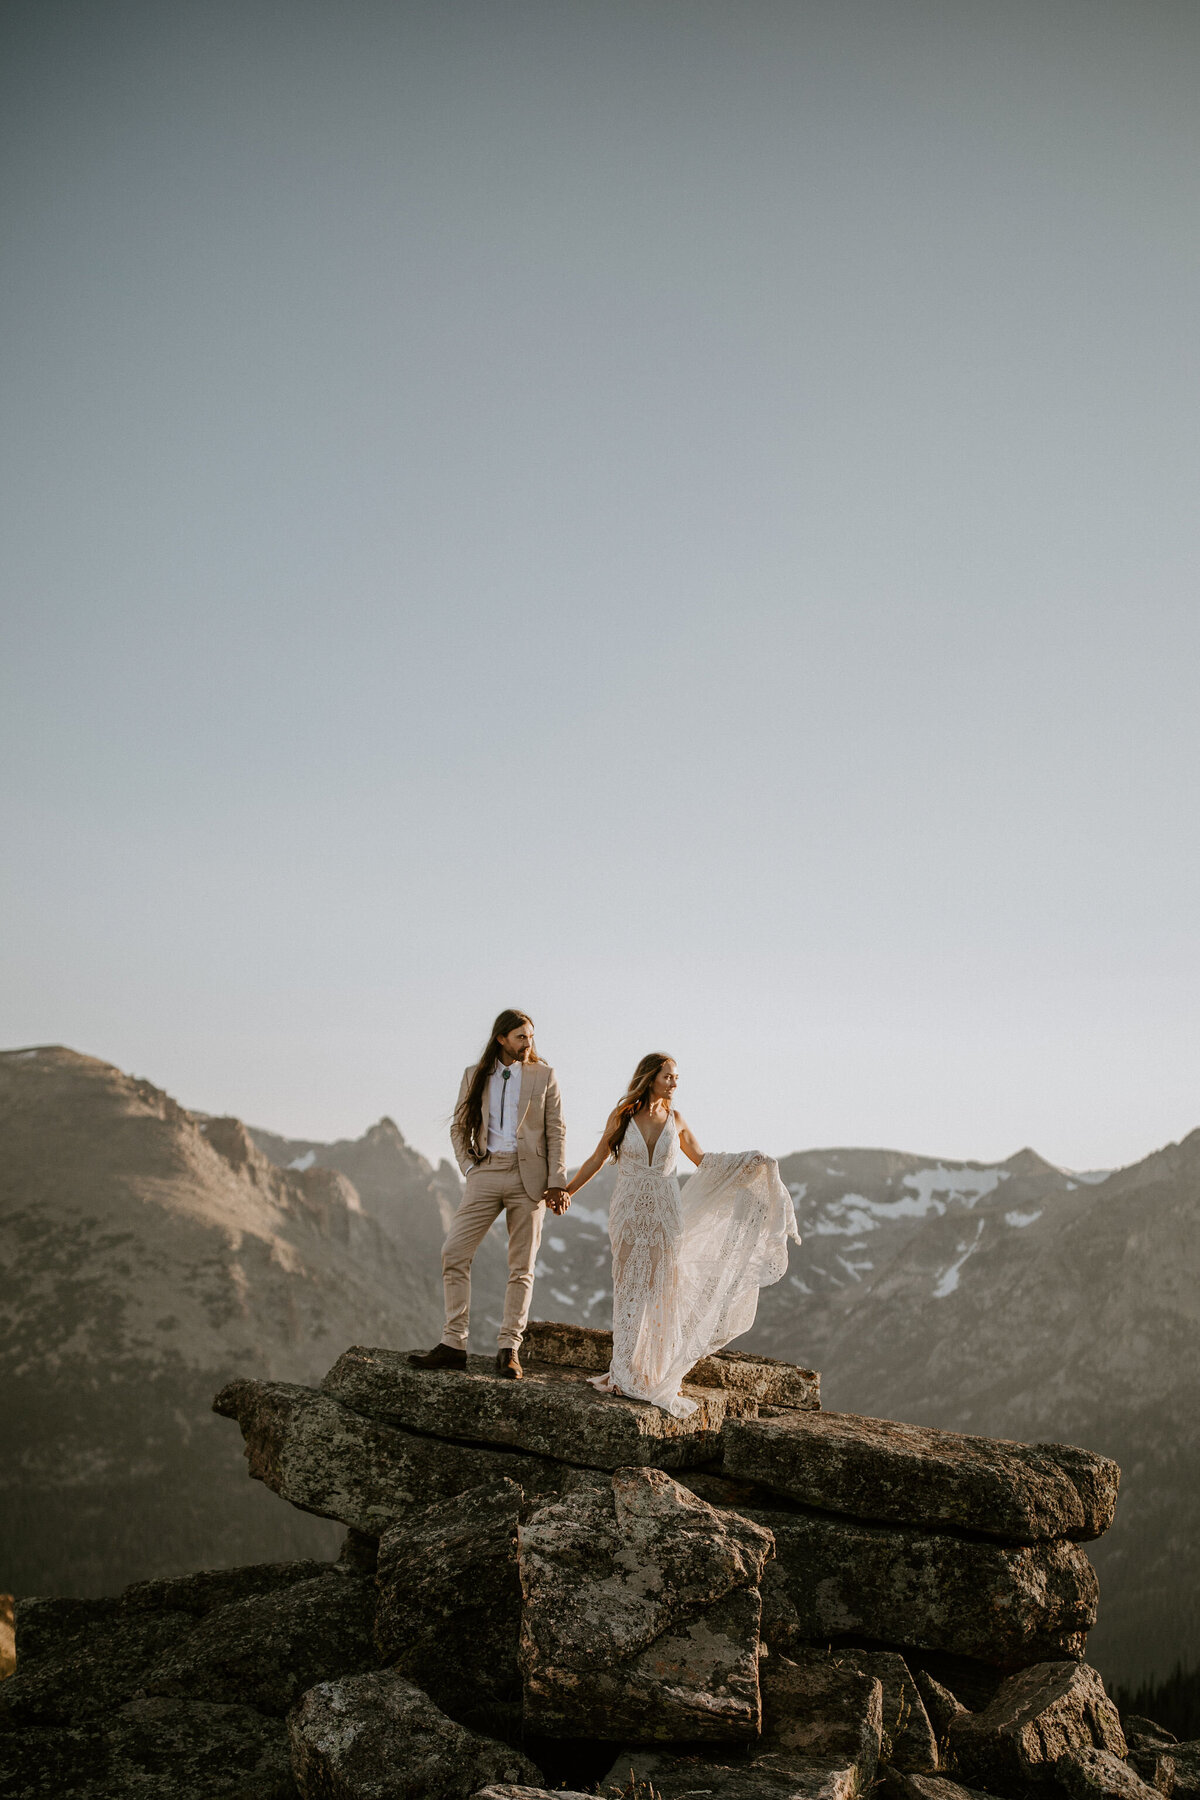 Bride and groom wearing an ivory suit and white wedding gown standing atop a rocky mountain landscape.